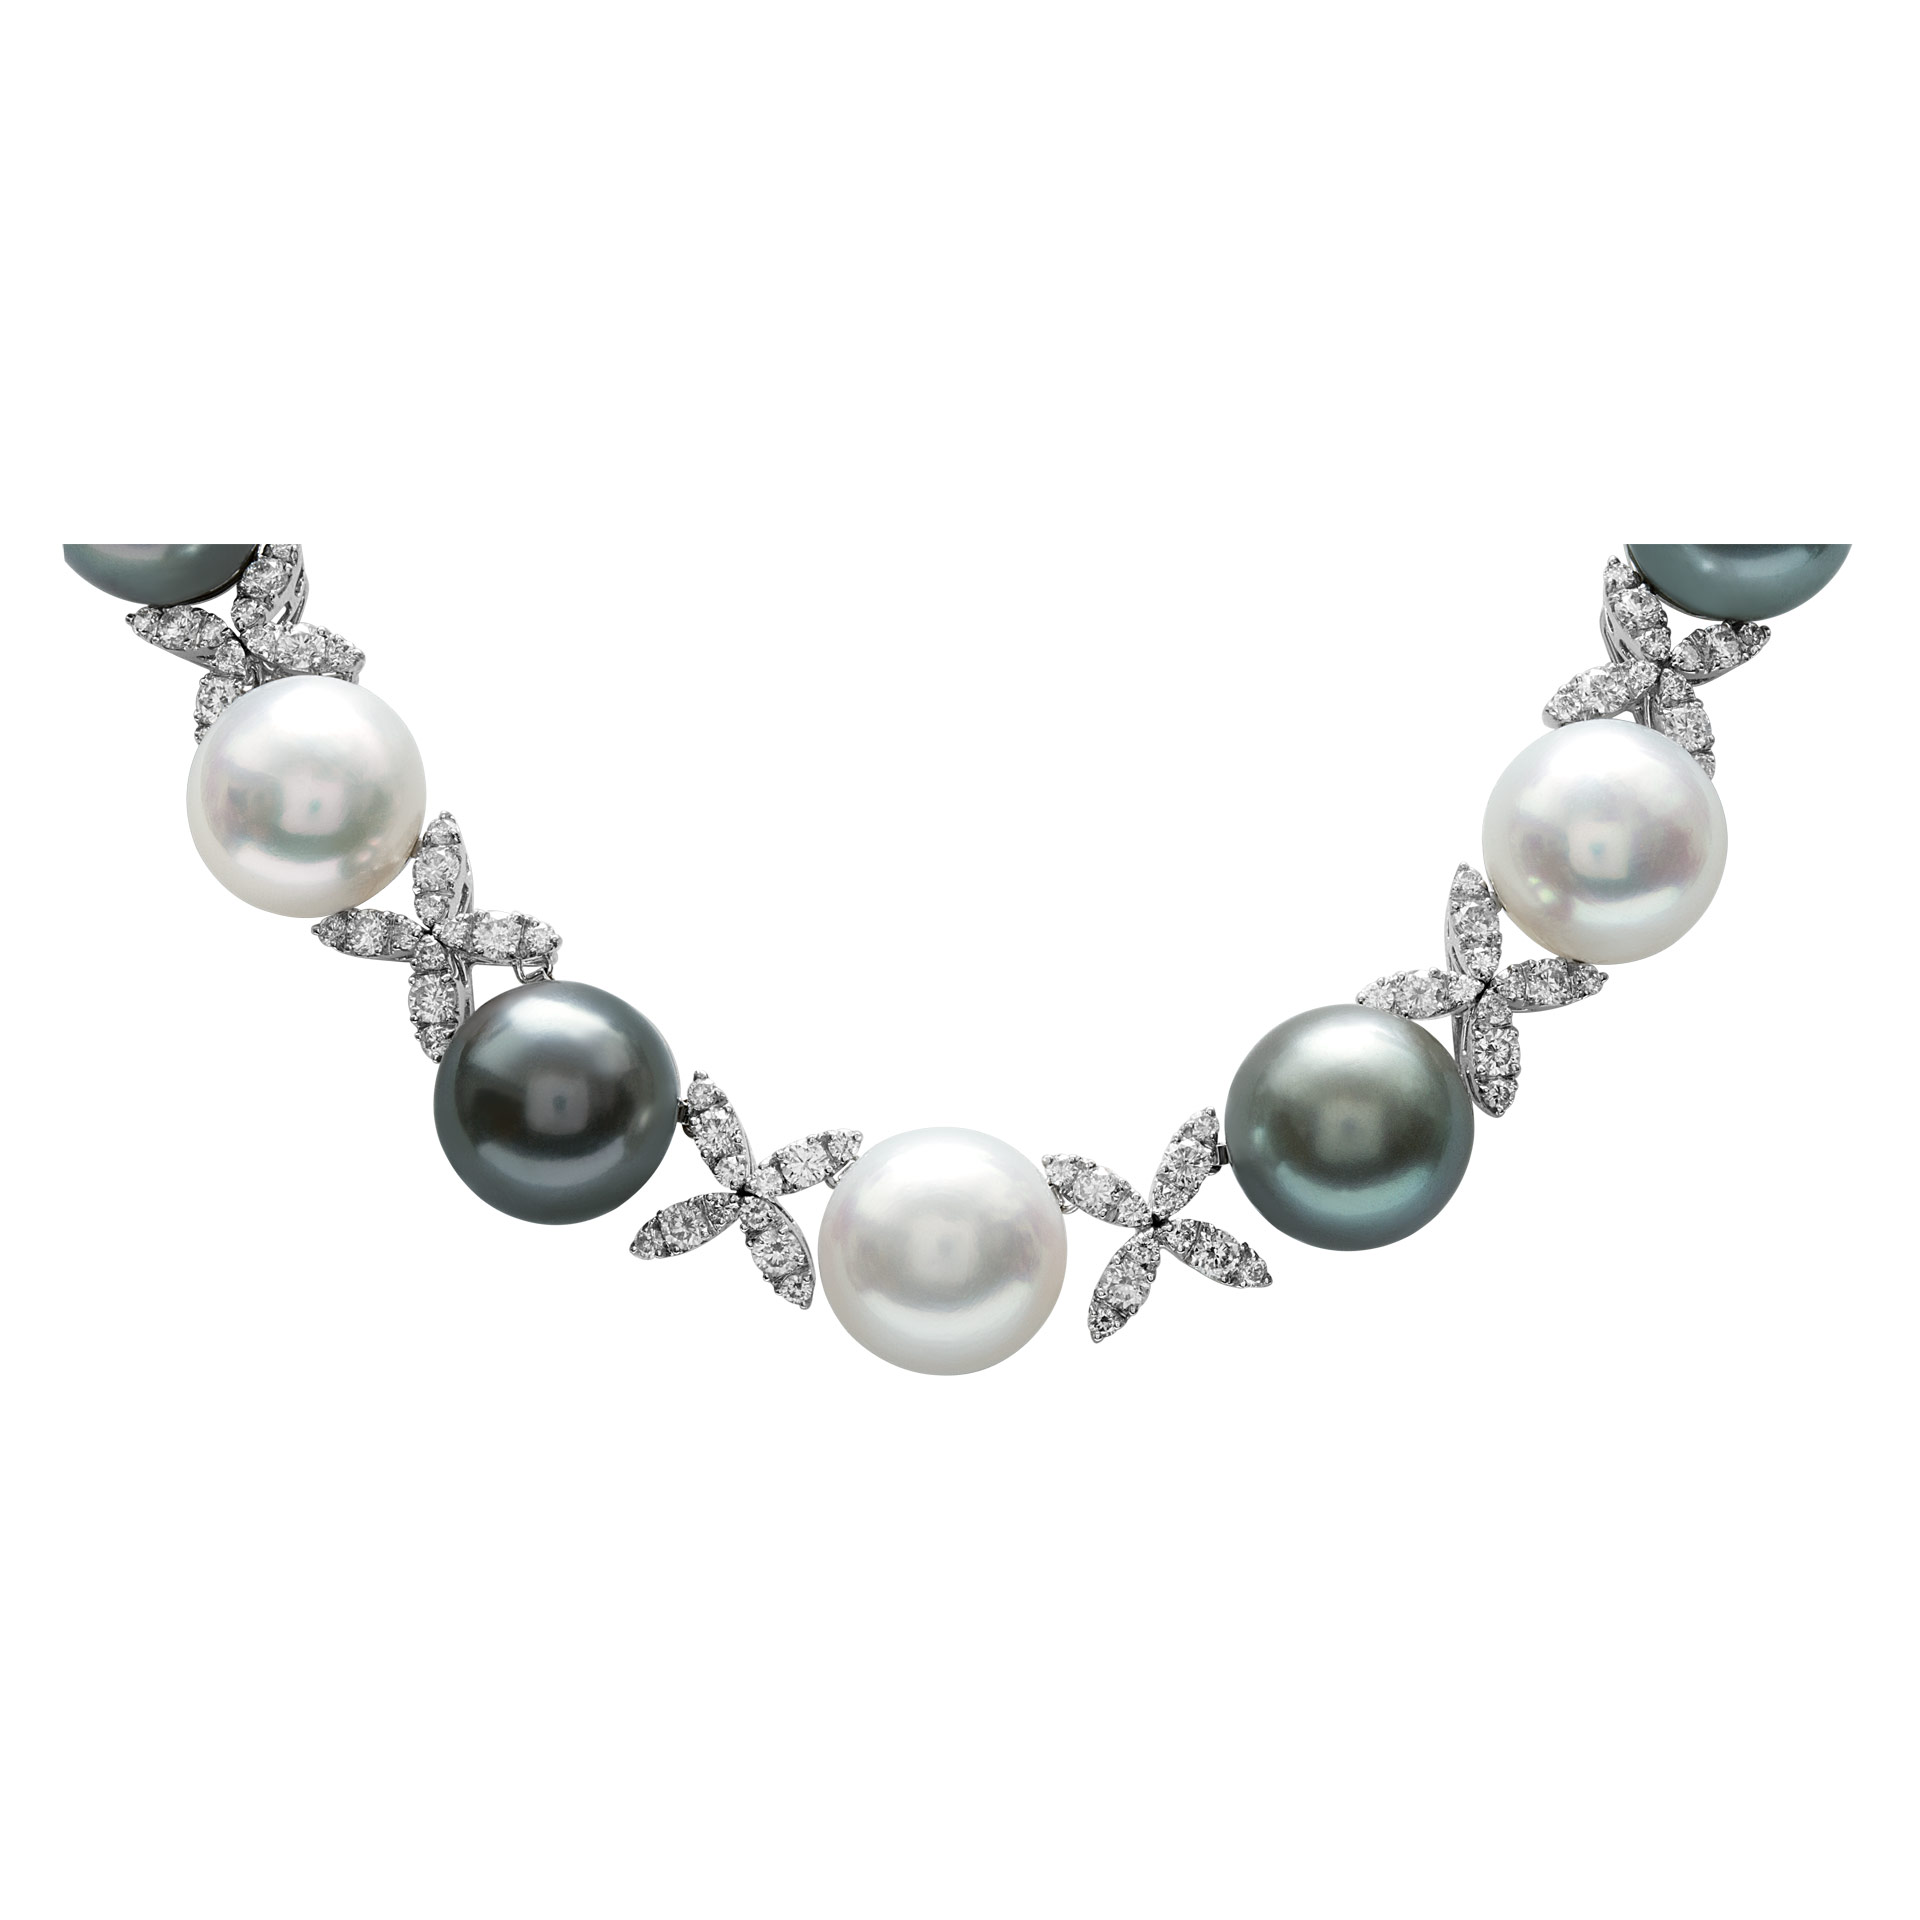 Pearl and diamond necklace with 11.91 cts in diamonds